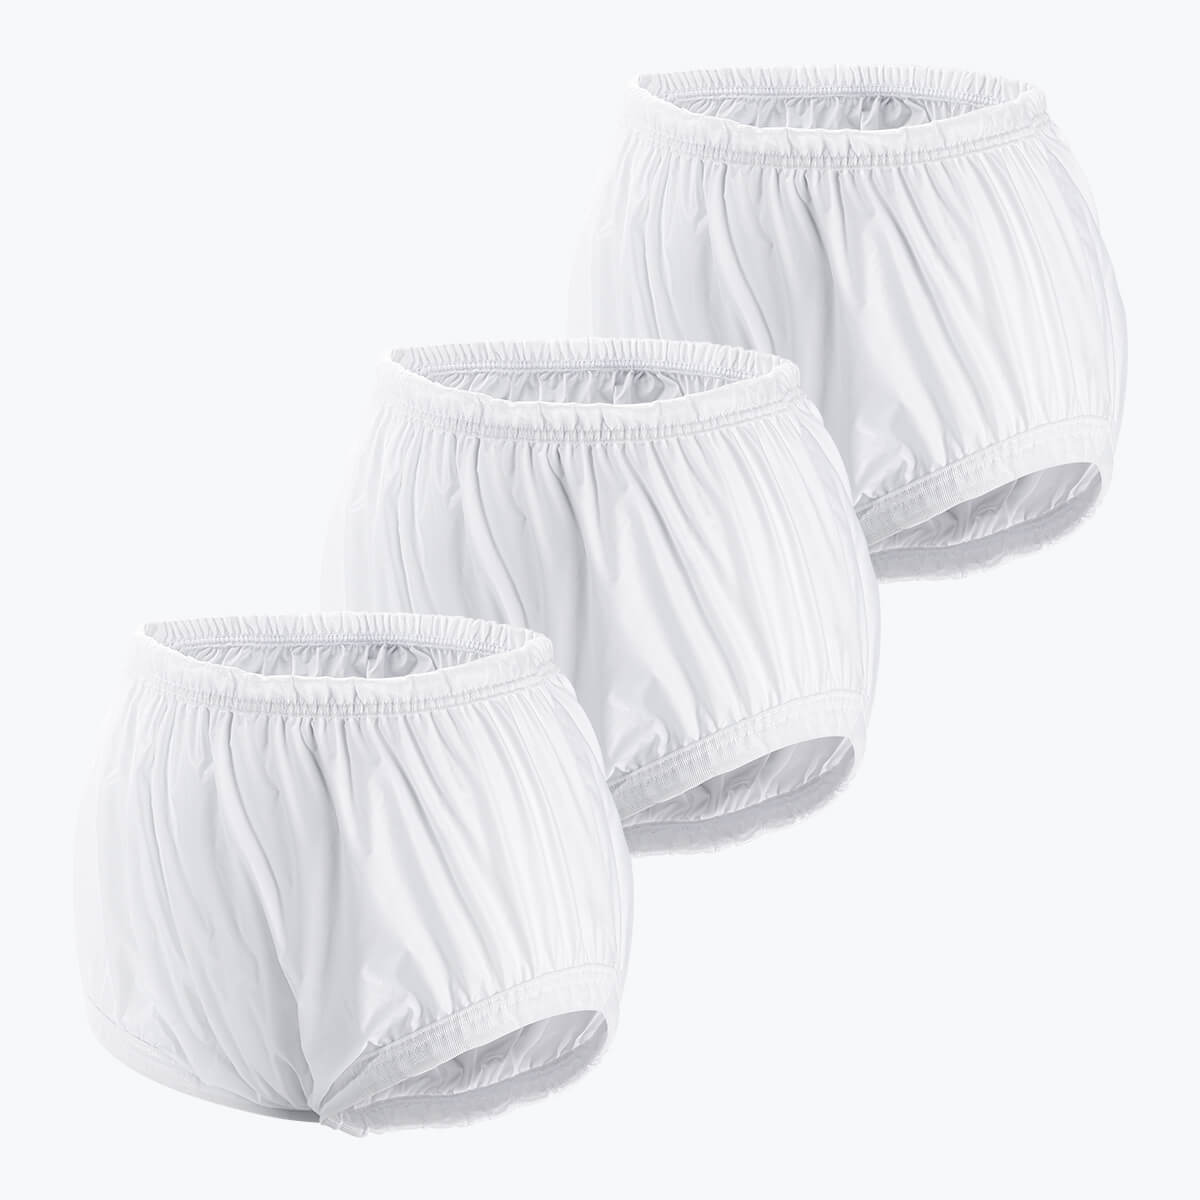 Plastic Pants for Adult Incontinence | Waterproof Rubber Panties & Diaper  Covers